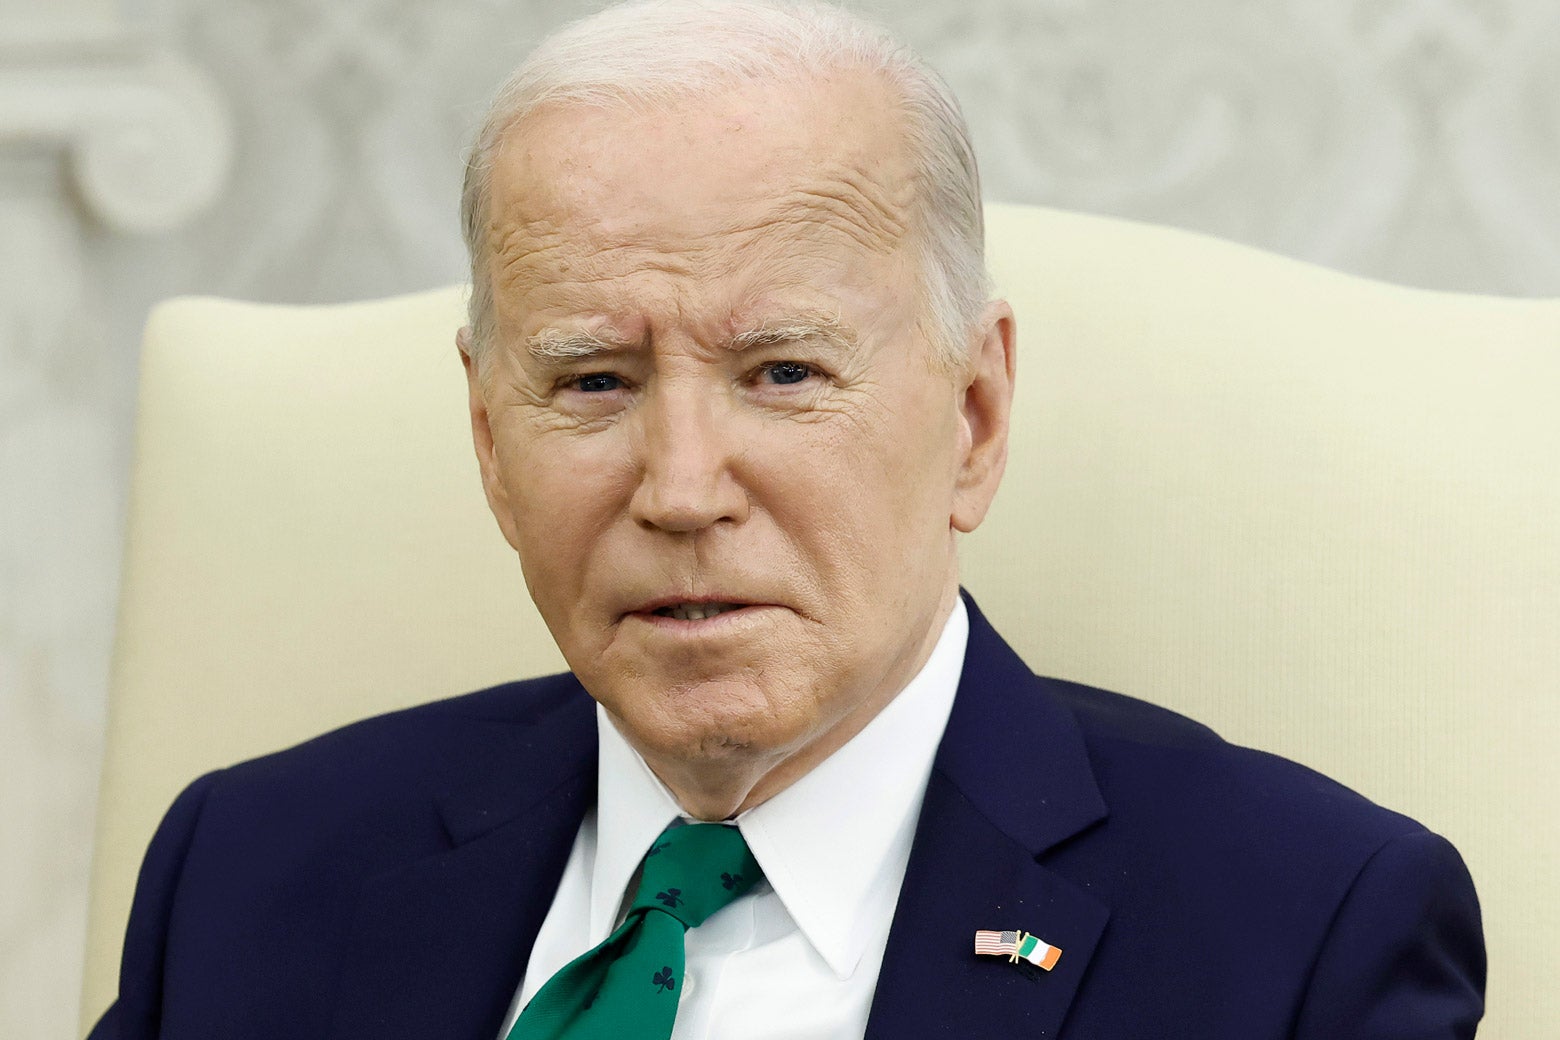 Why Is the Biden Administration Reviving One of Trump’s Worst Censorship Policies? Laila L. Hlass, Elora Mukherjee, Carrie L. Rosenbaum, and Maureen Sweeney